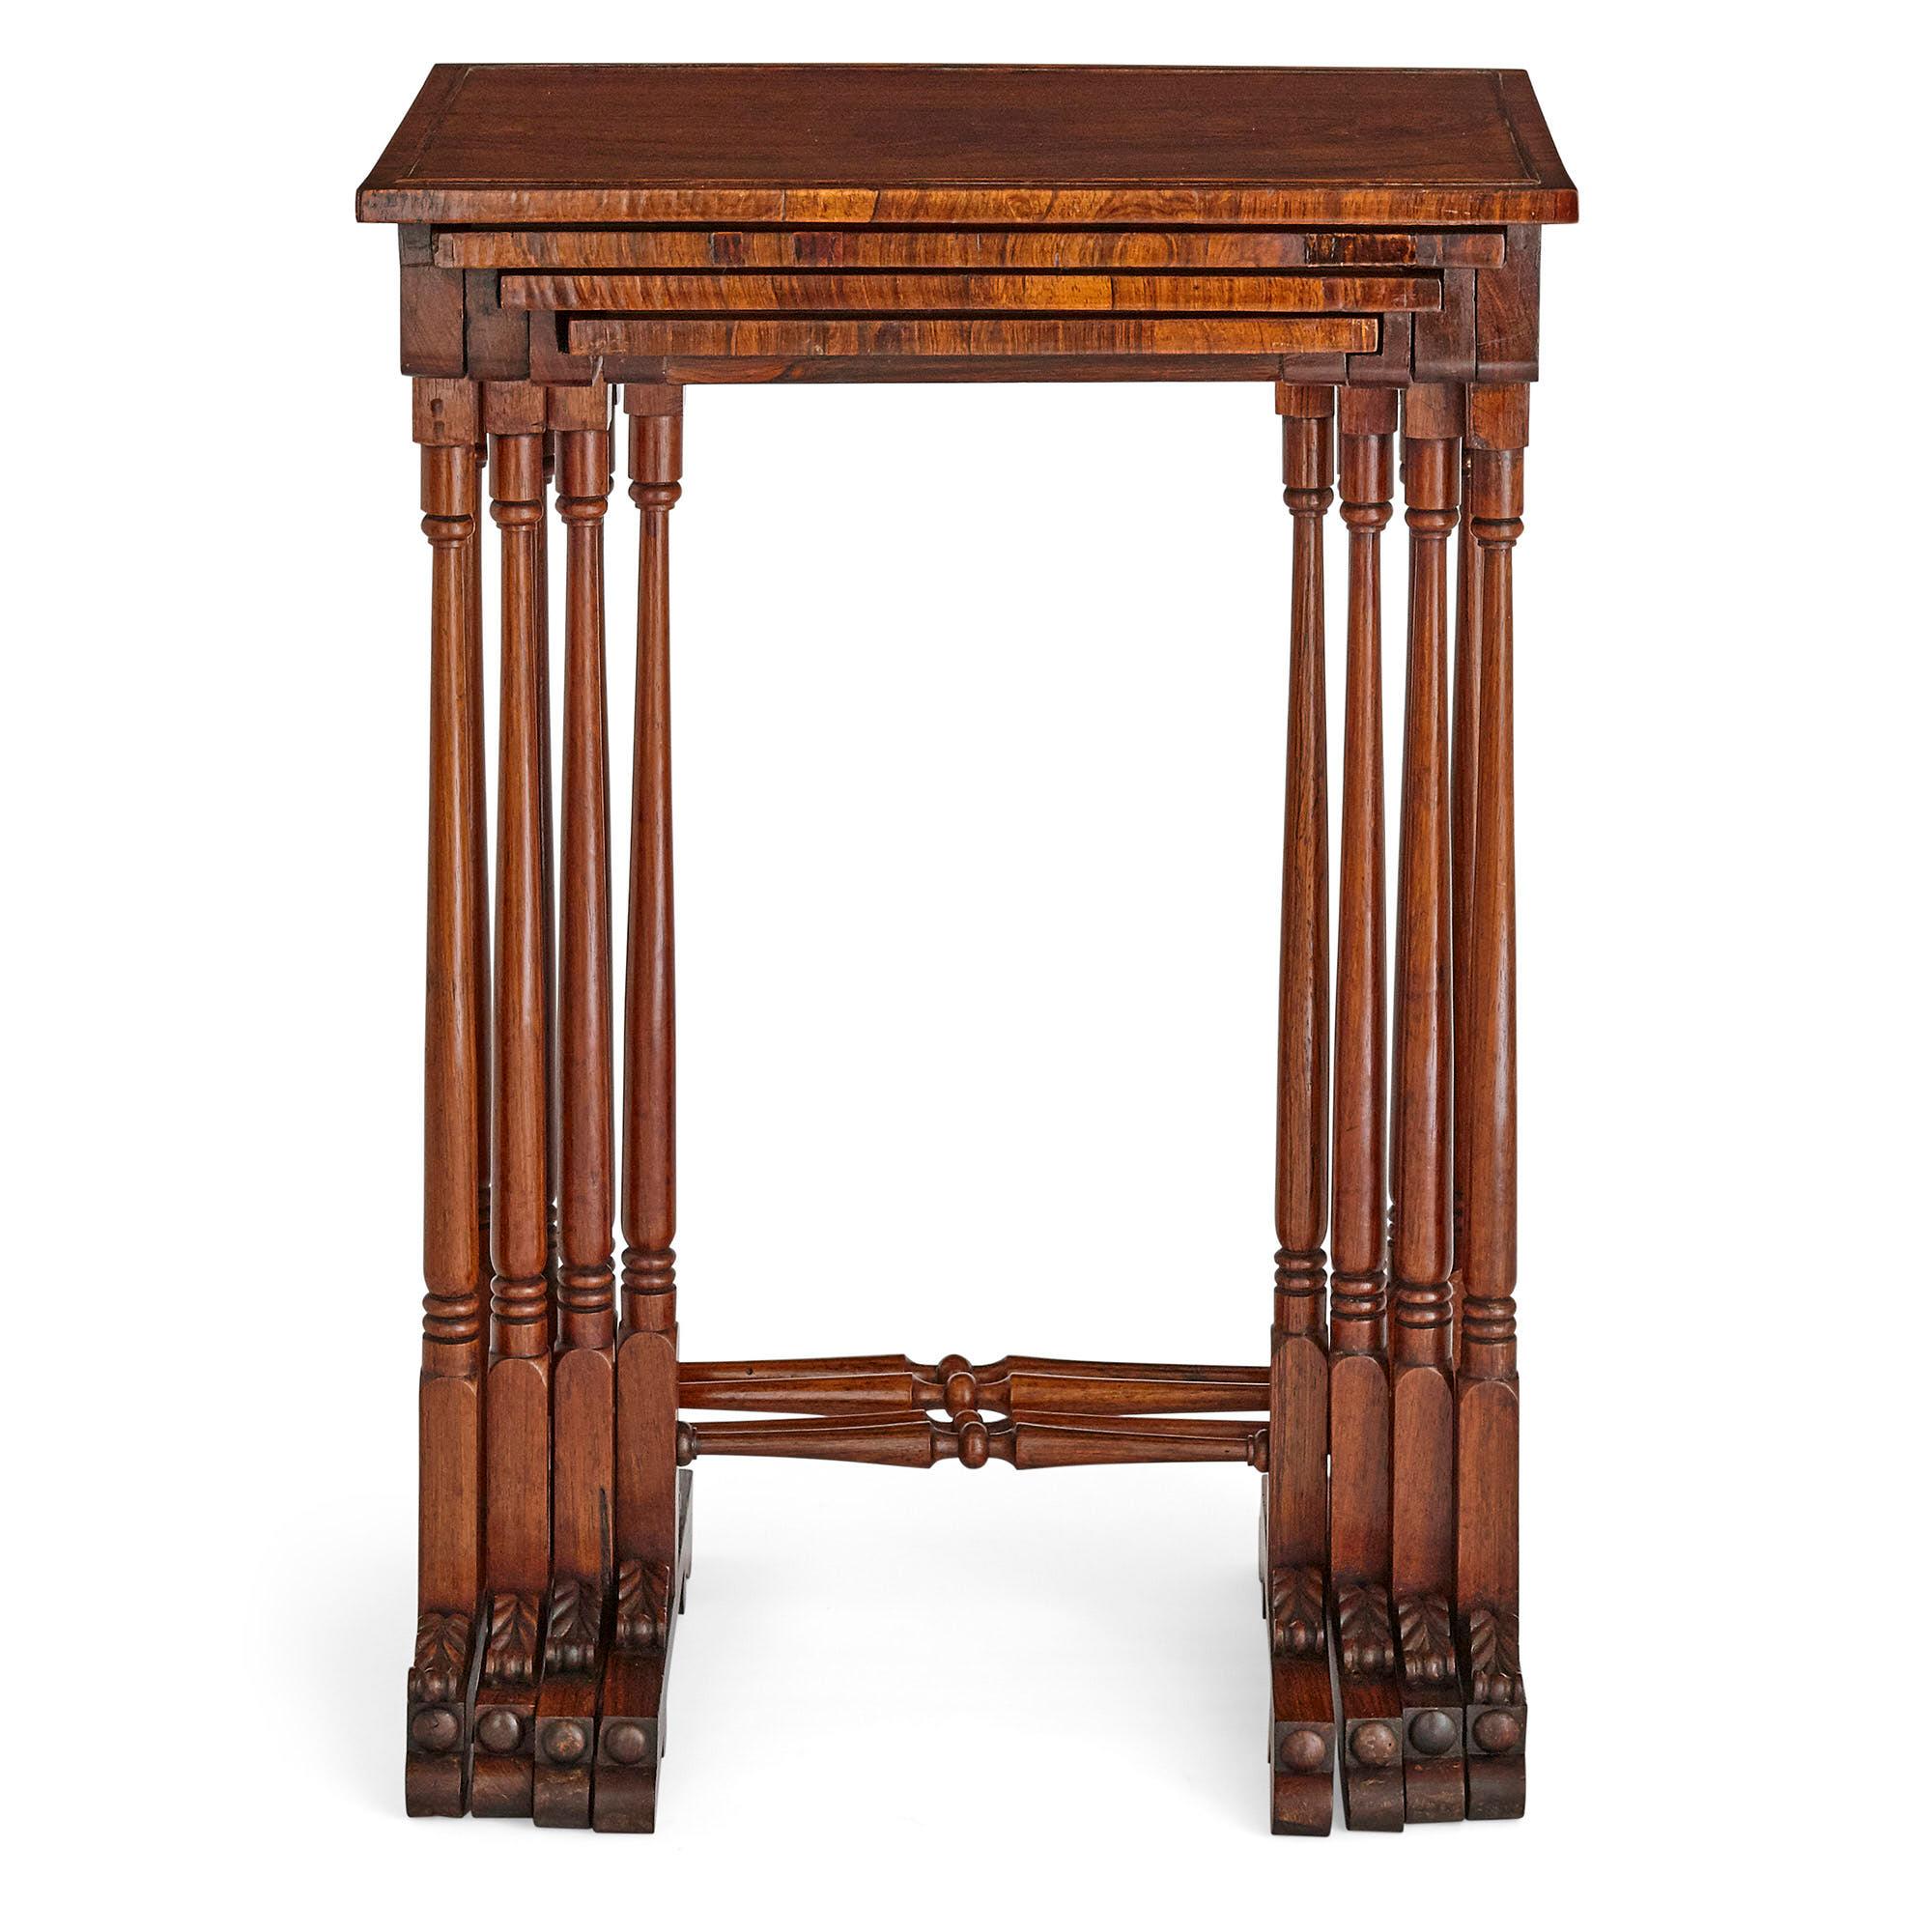 These side tables come as a set of four: their sizes allow for them to be stacked on top of each other as well as used separately. They are crafted from rosewood and date from early 19th century, during the period of King William IV. Each table is